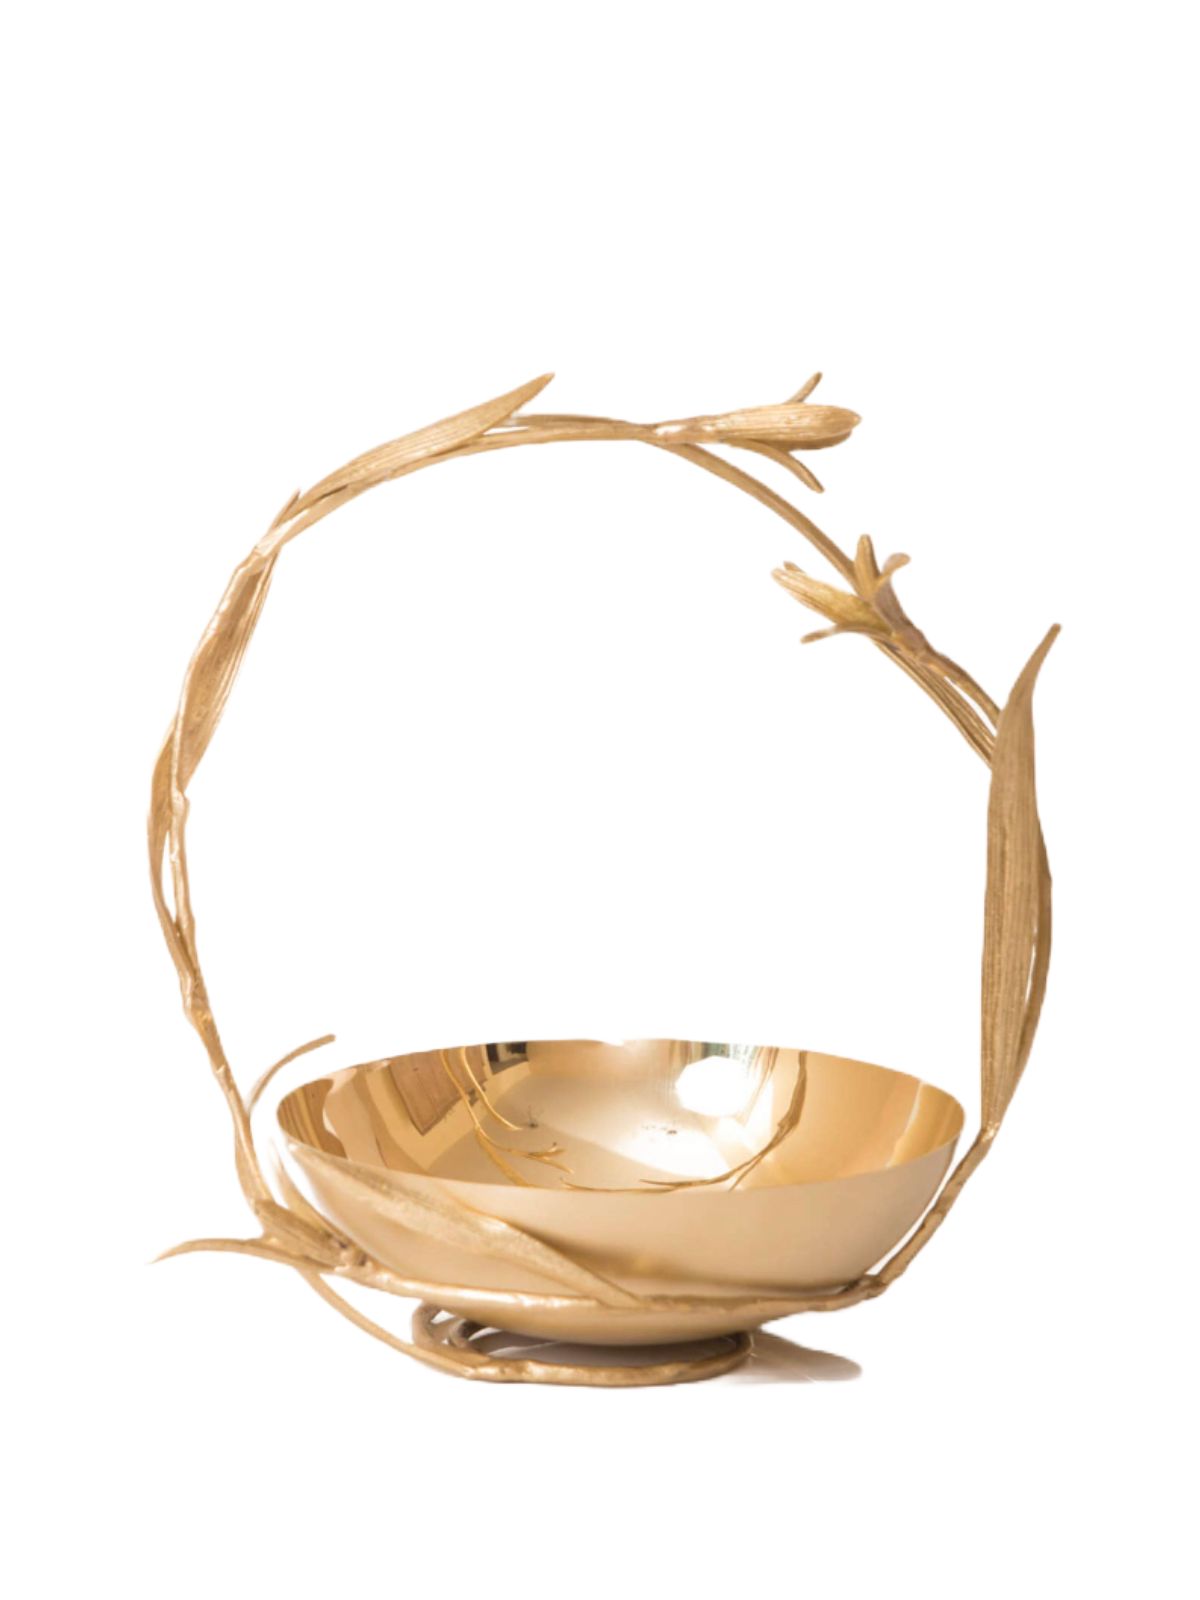 The Lily Gold Branch Bowl is inspired by the beauty of the lily flower.